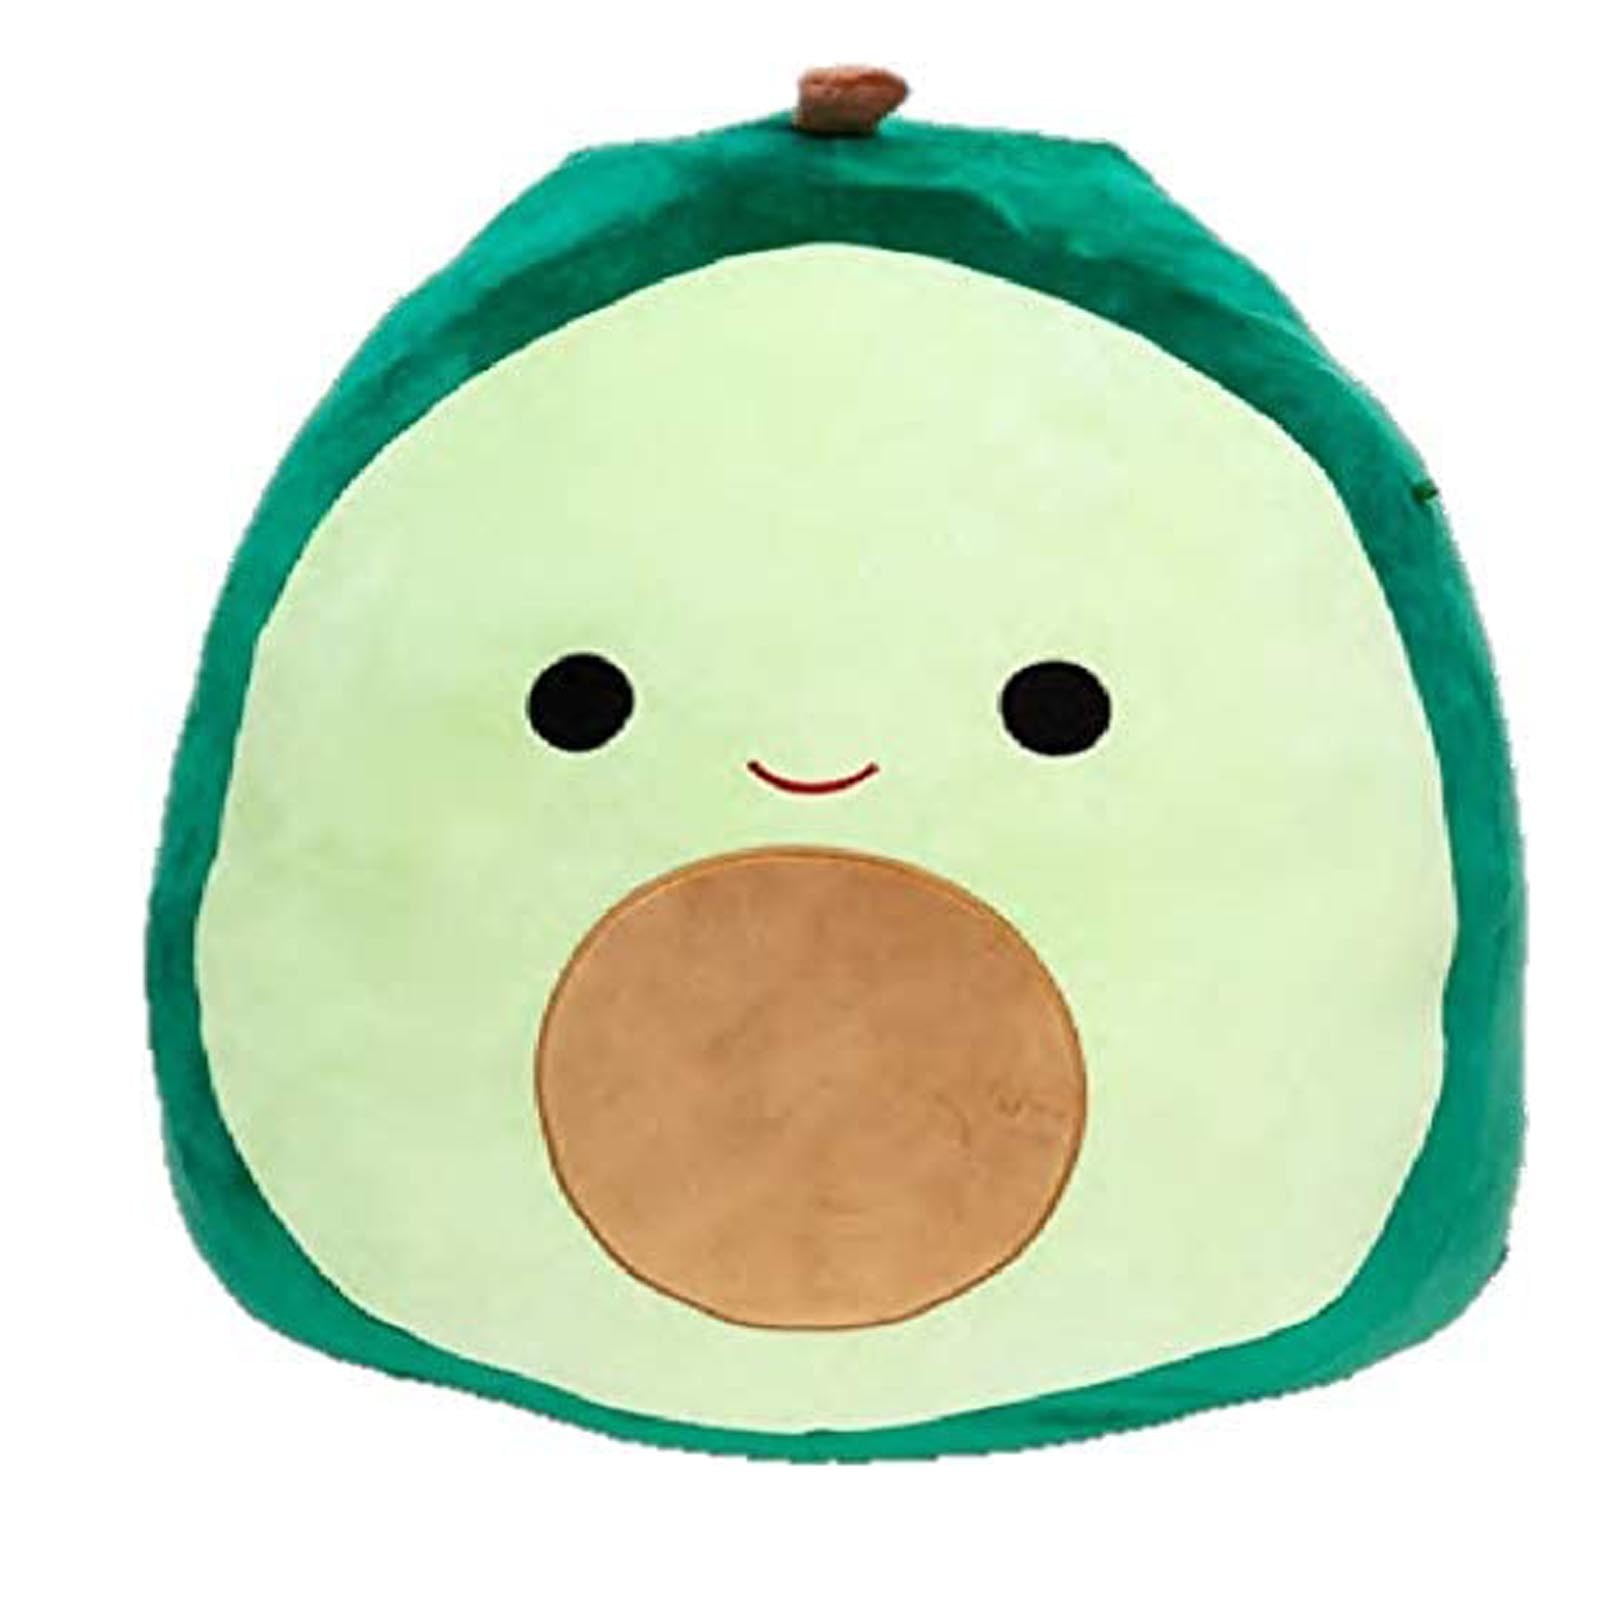 Squishmallows Austin The Avocado With Furry Belly 8" Fruit NEW FREE SHIPPING 